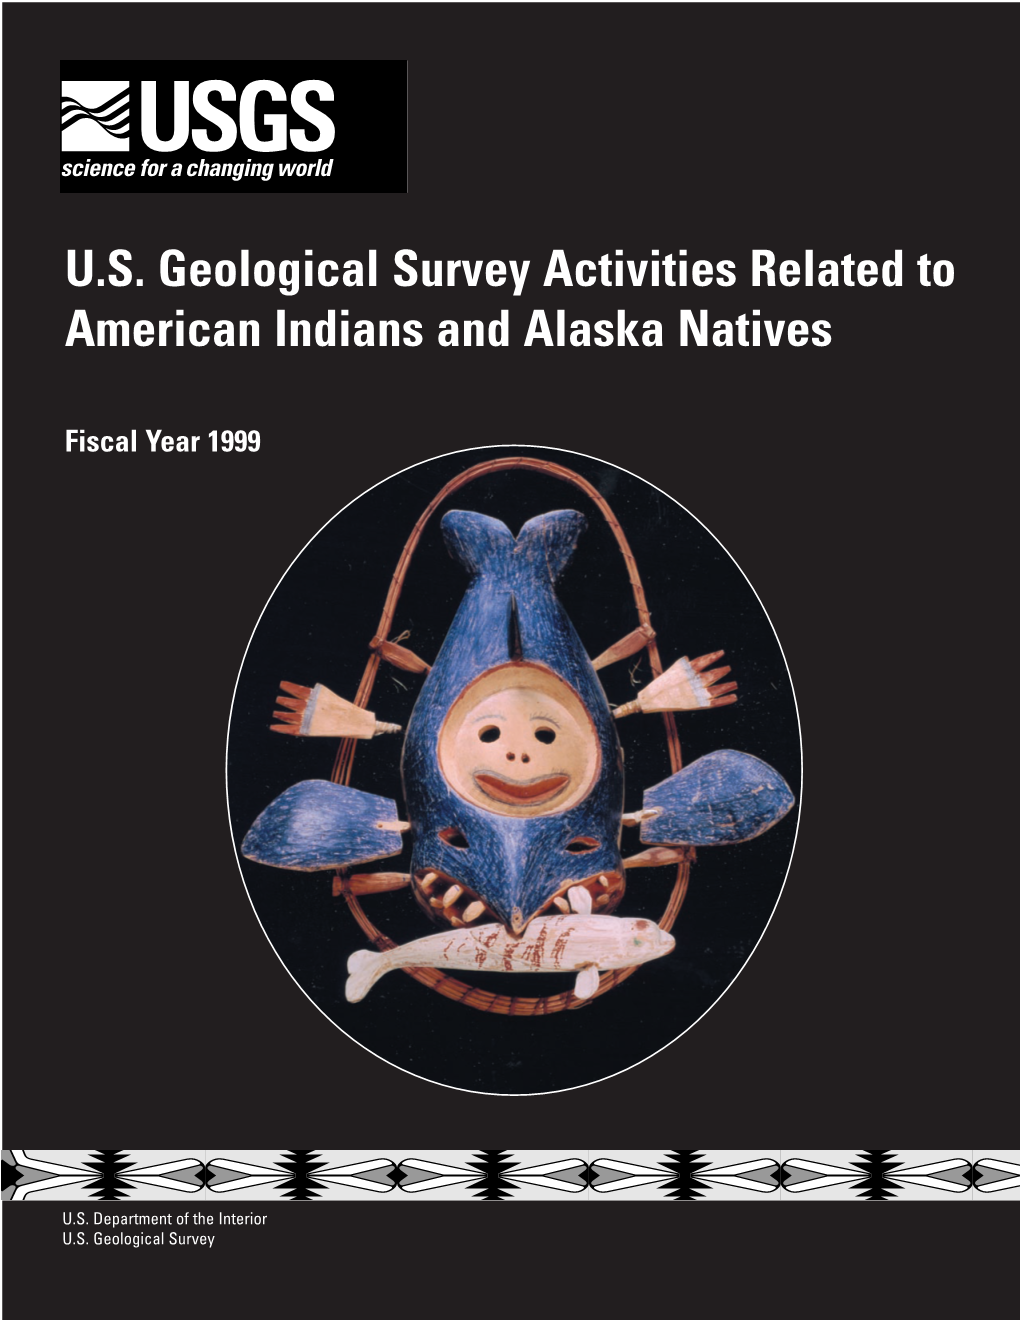 USGS Activities Related to American Indians and Alaska Natives